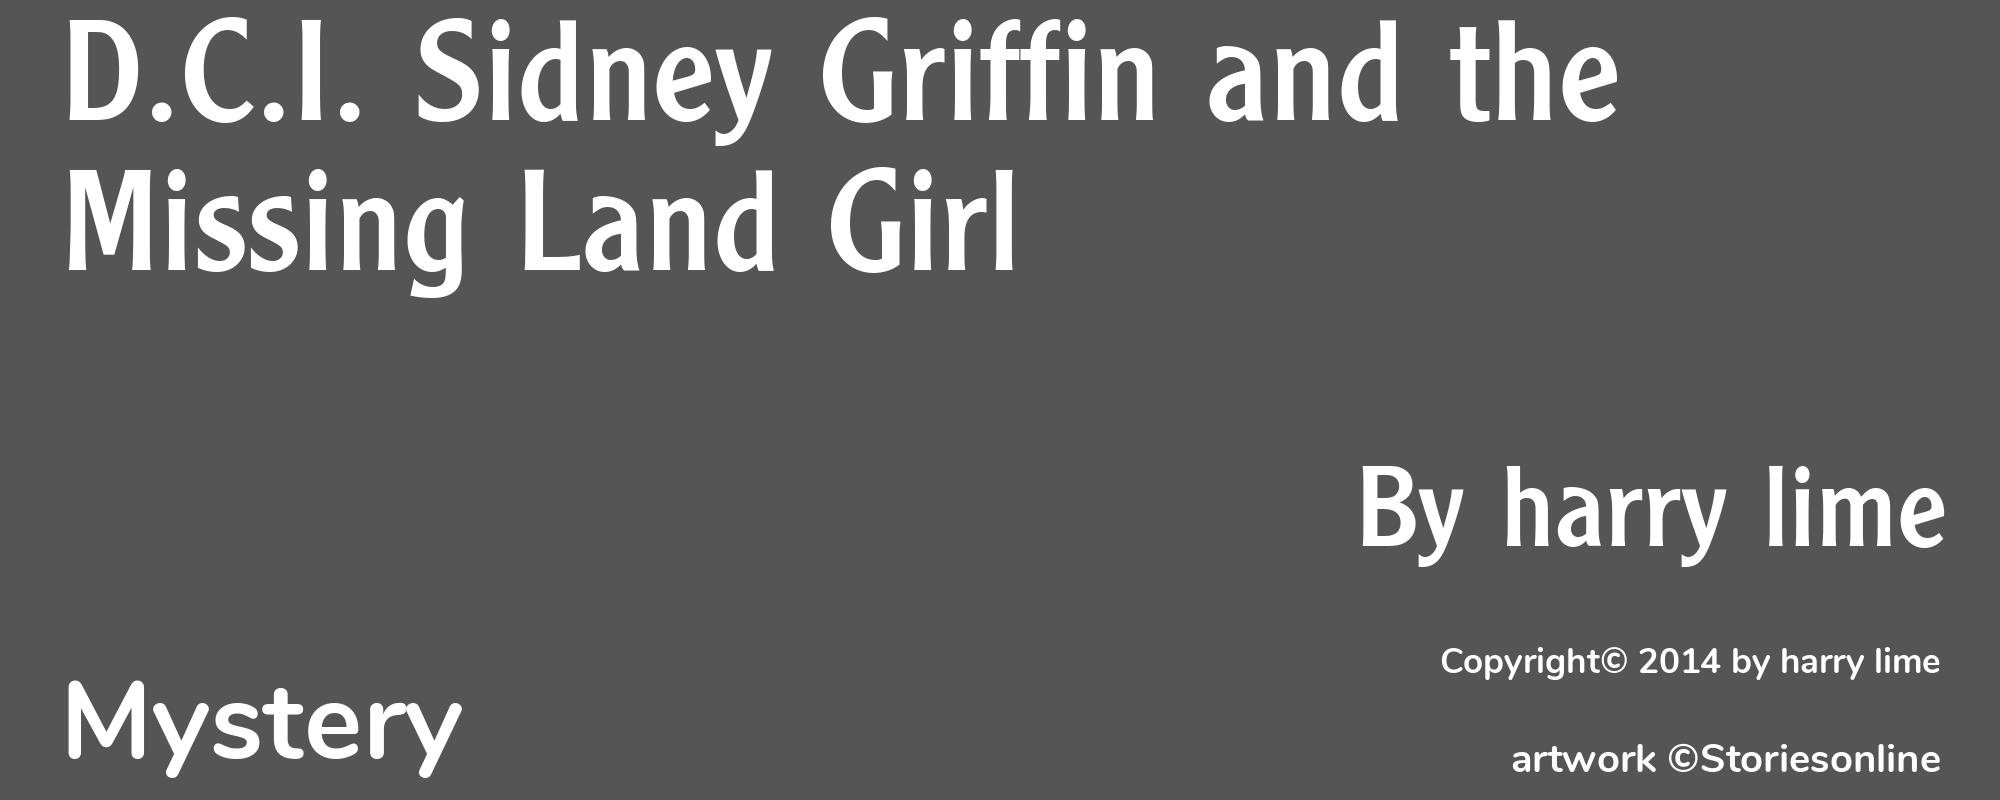 D.C.I. Sidney Griffin and the Missing Land Girl - Cover